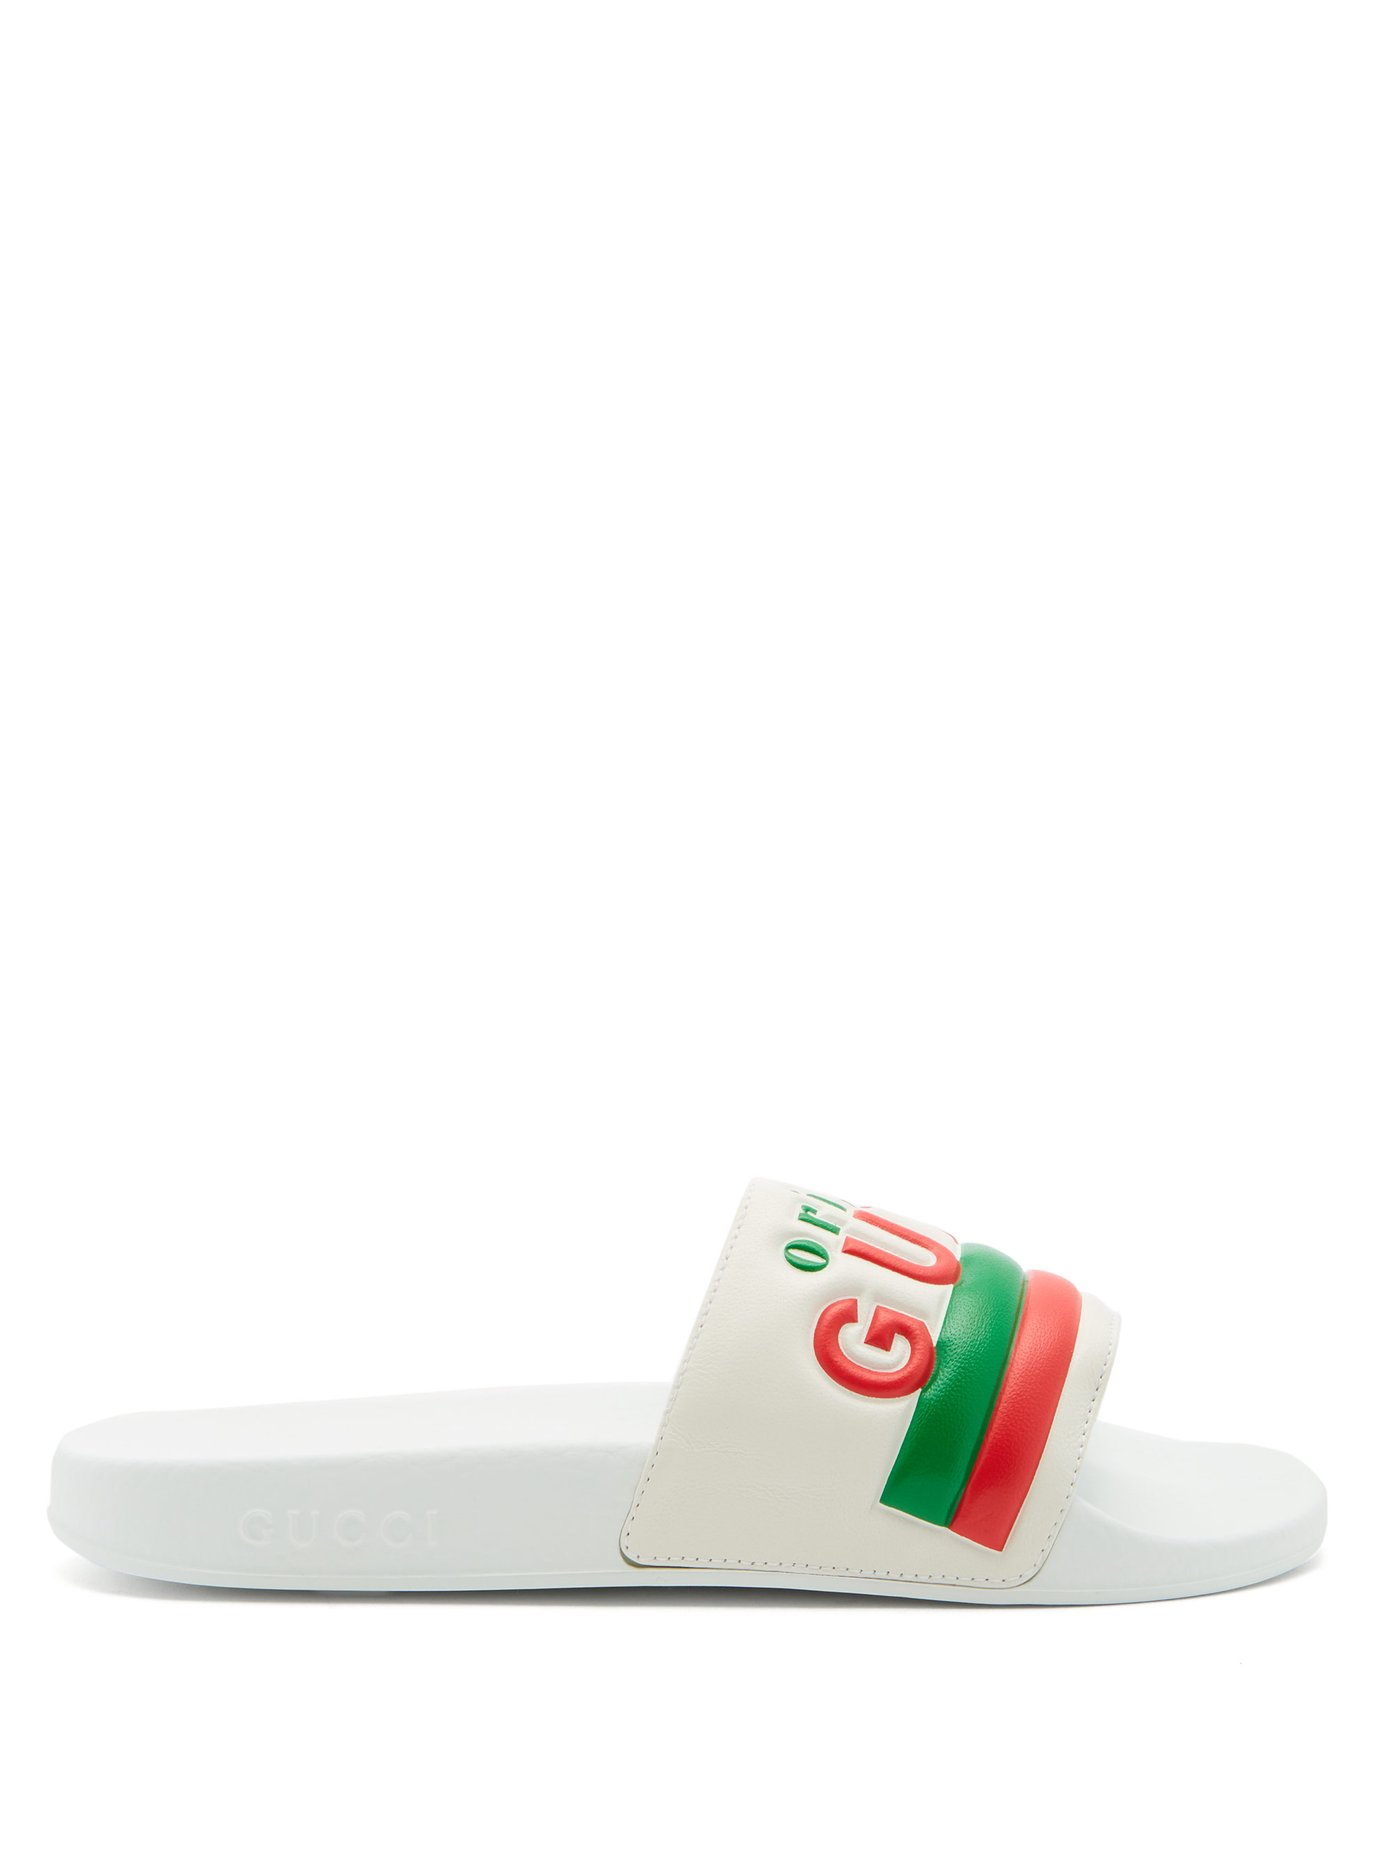 gucci slides with logo